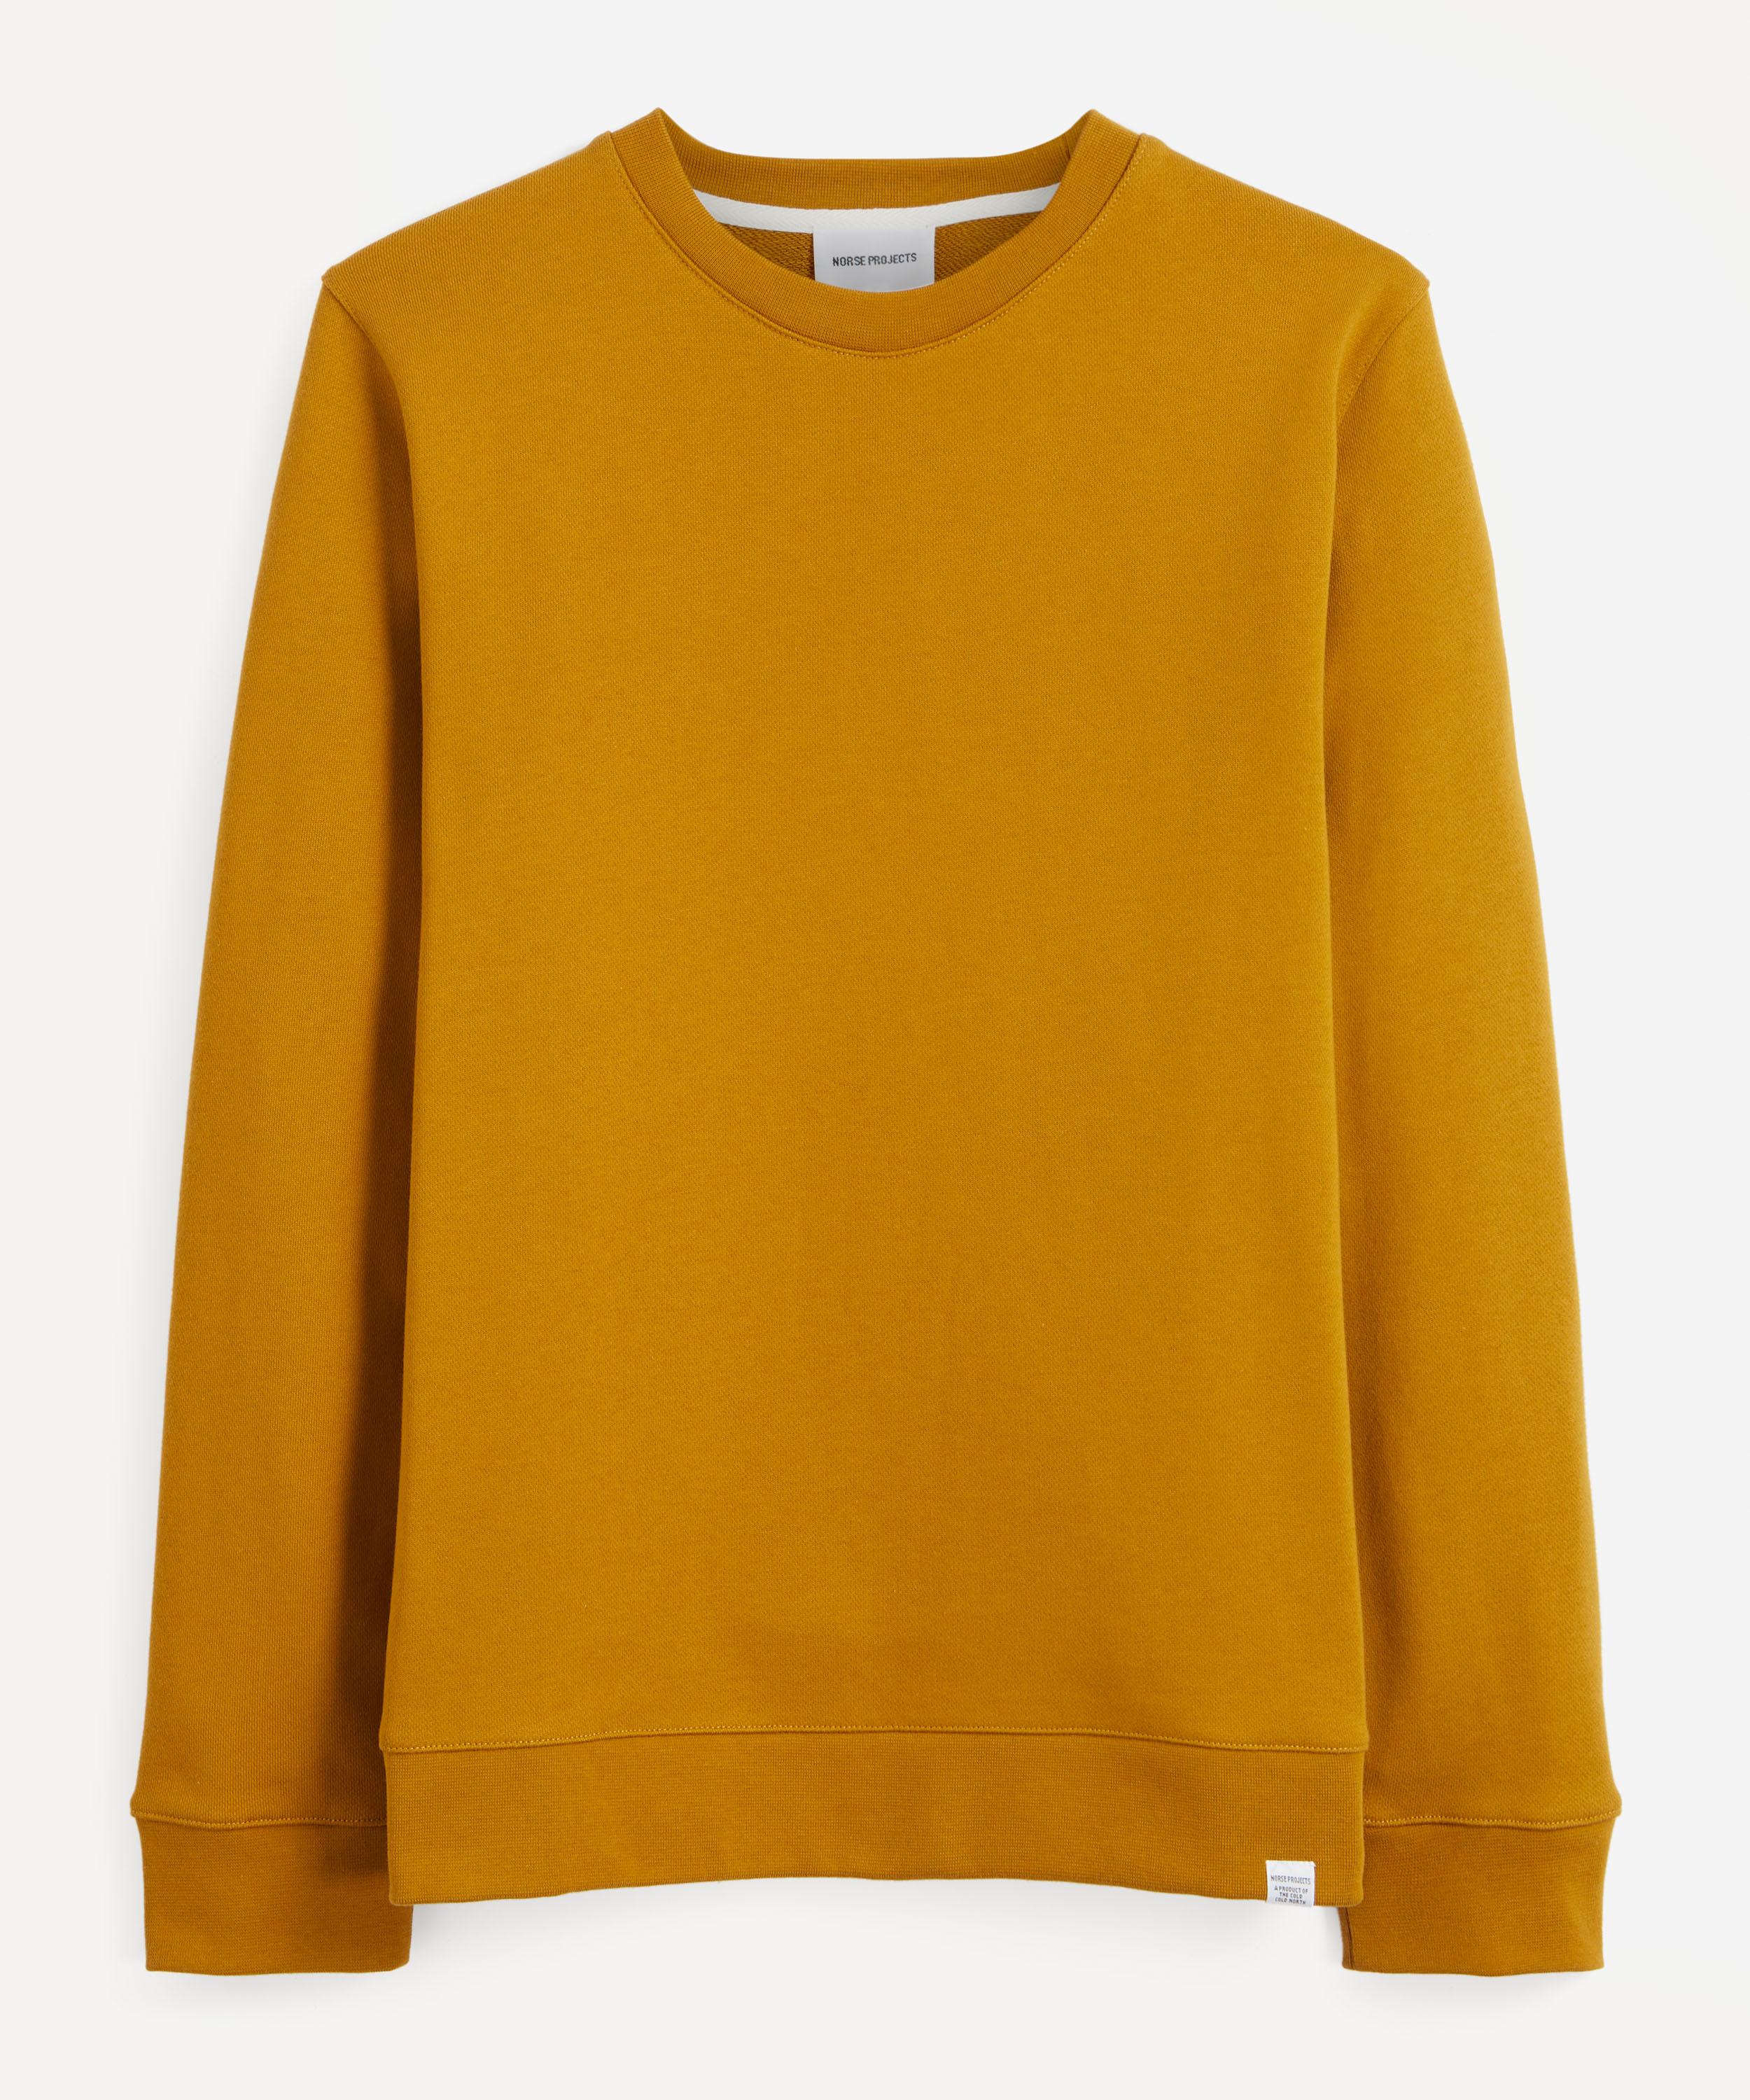 NORSE PROJECTS VAGN COTTON SWEATER,000599212